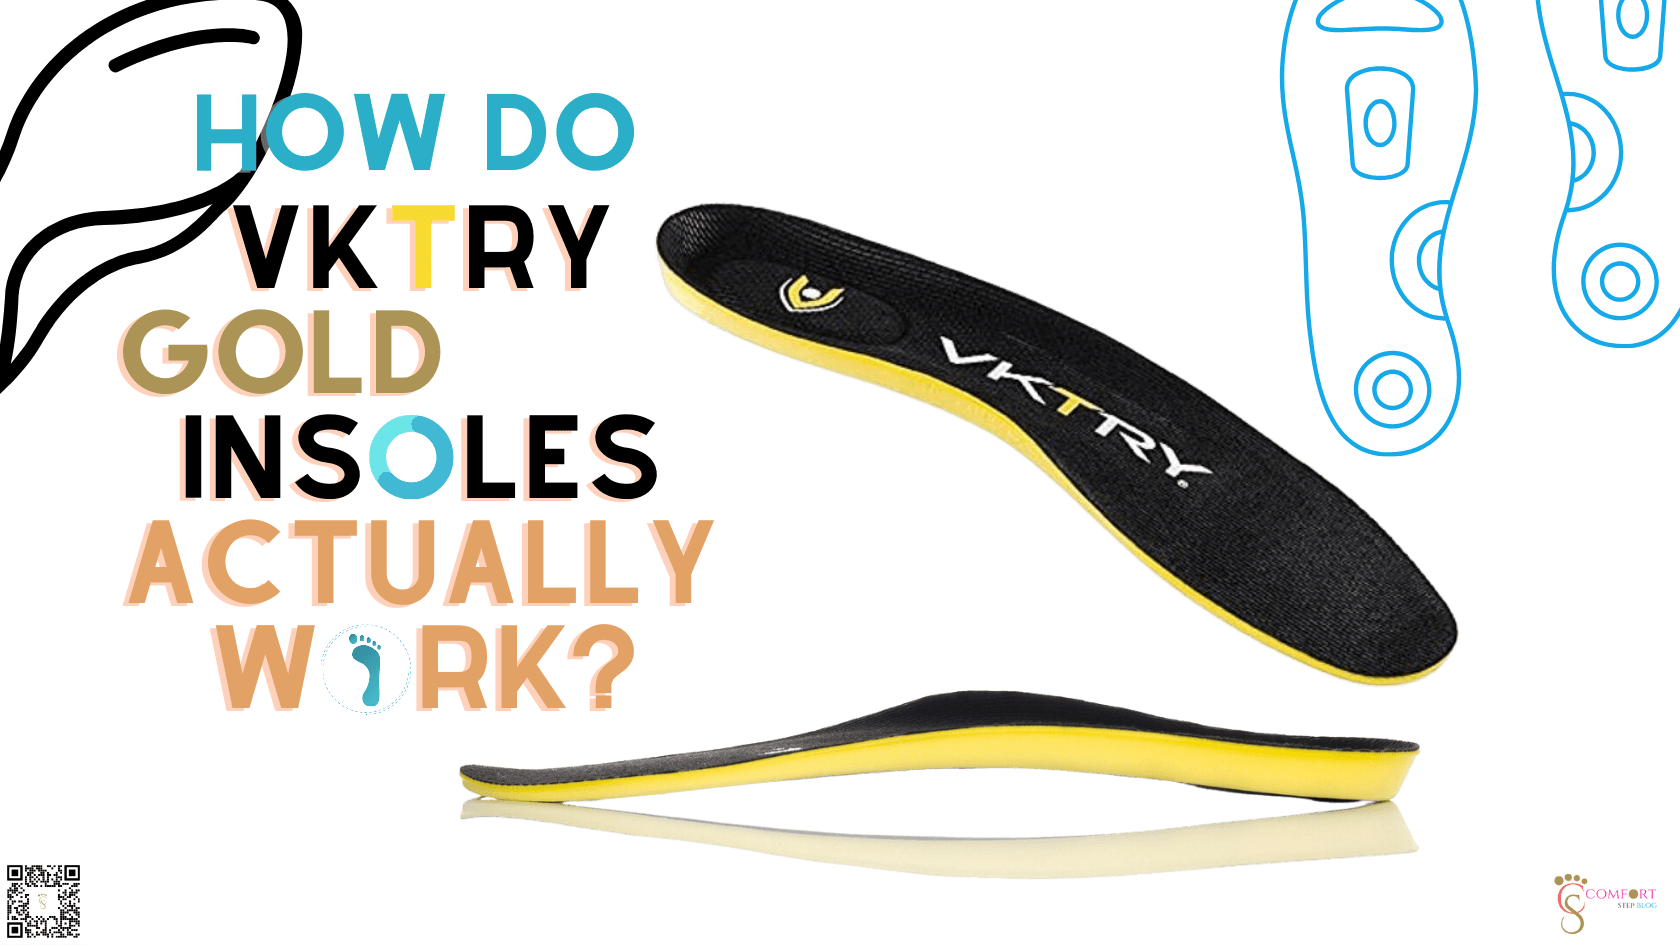 How do VKTRY Gold insoles actually work?